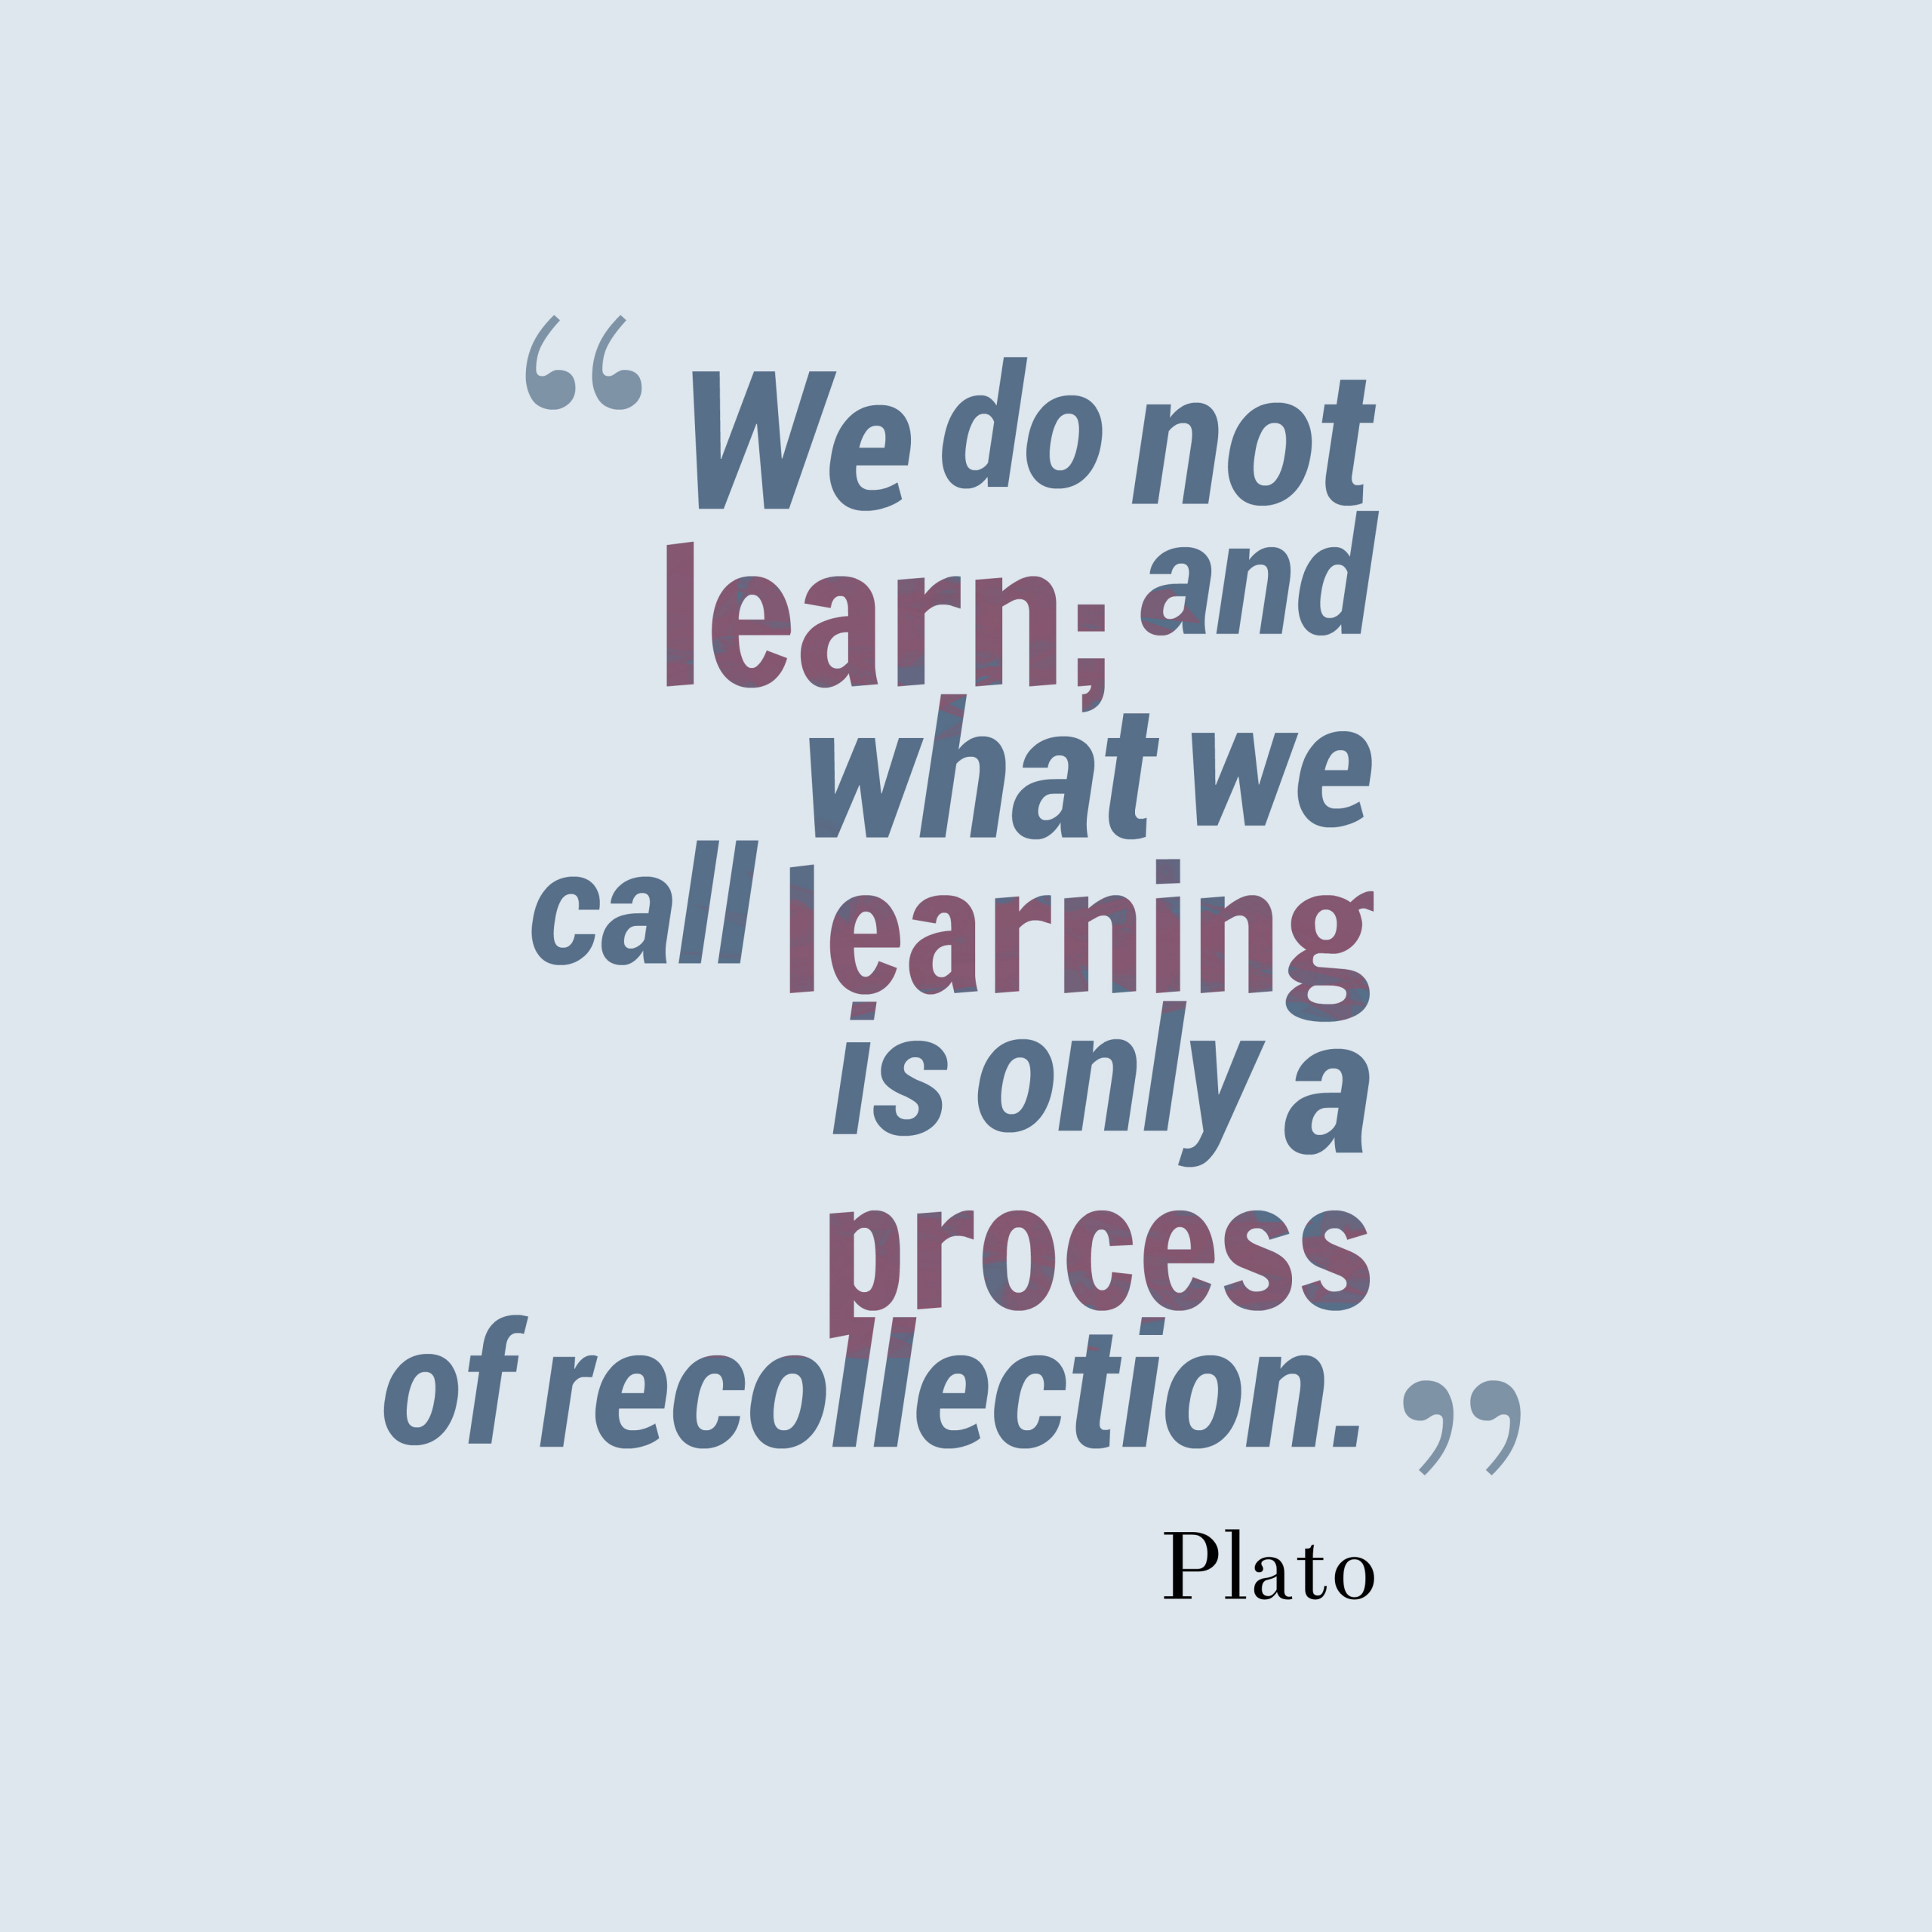 Plato Education Quotes
 Get high resolution using text from Plato quote about